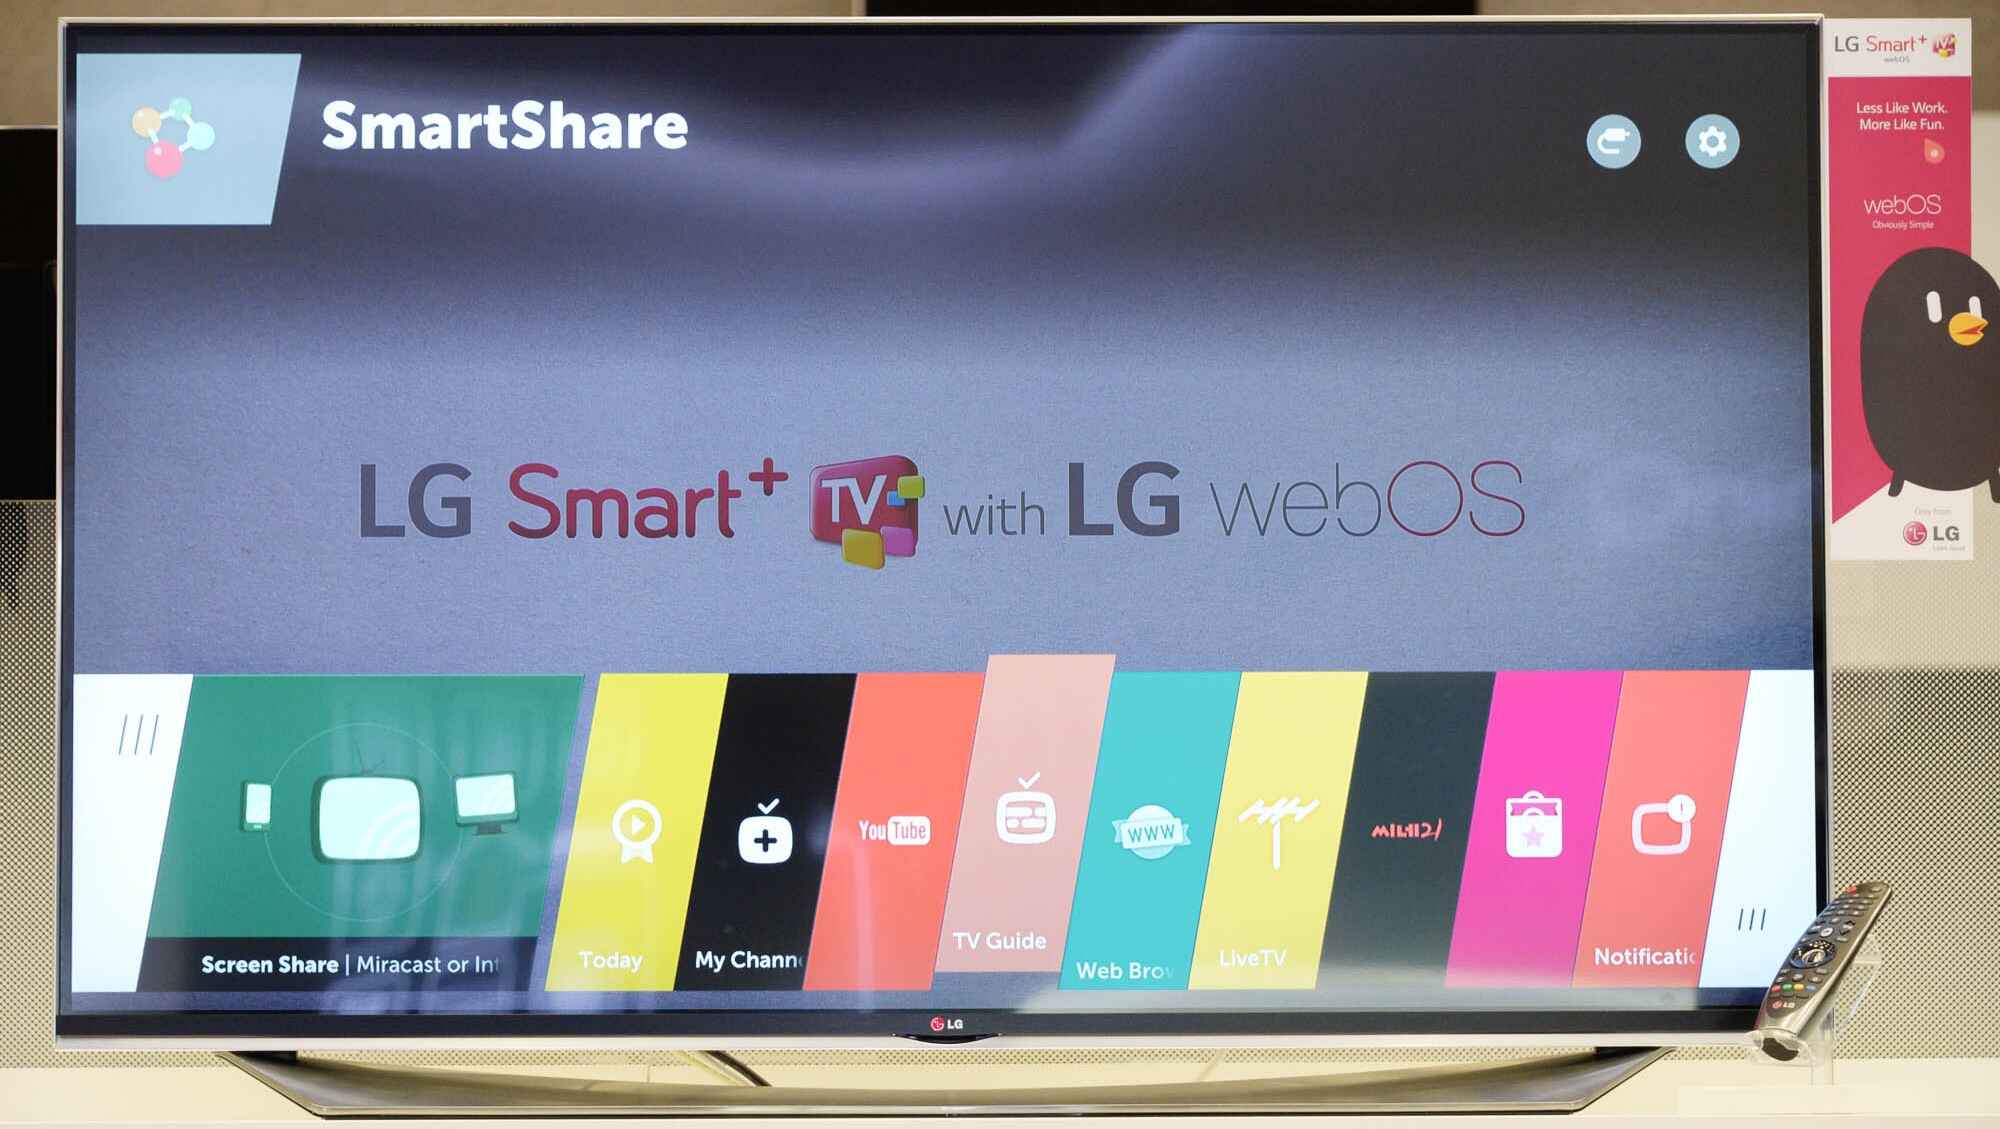 How To Update Web Browser On LG Smart TV